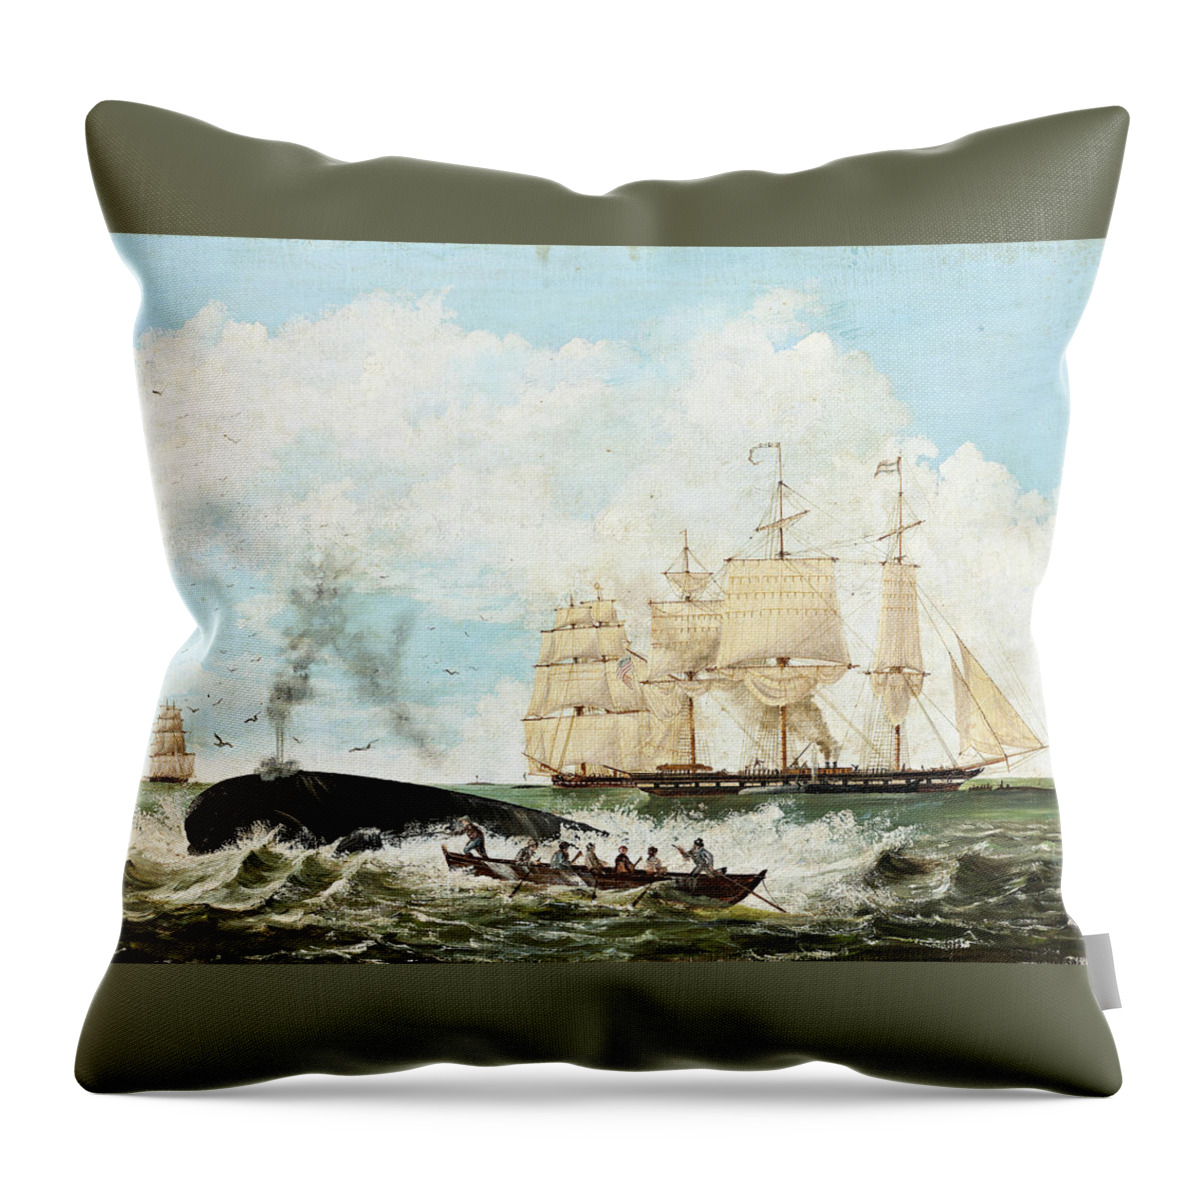 American School Throw Pillow featuring the painting Whaling by MotionAge Designs